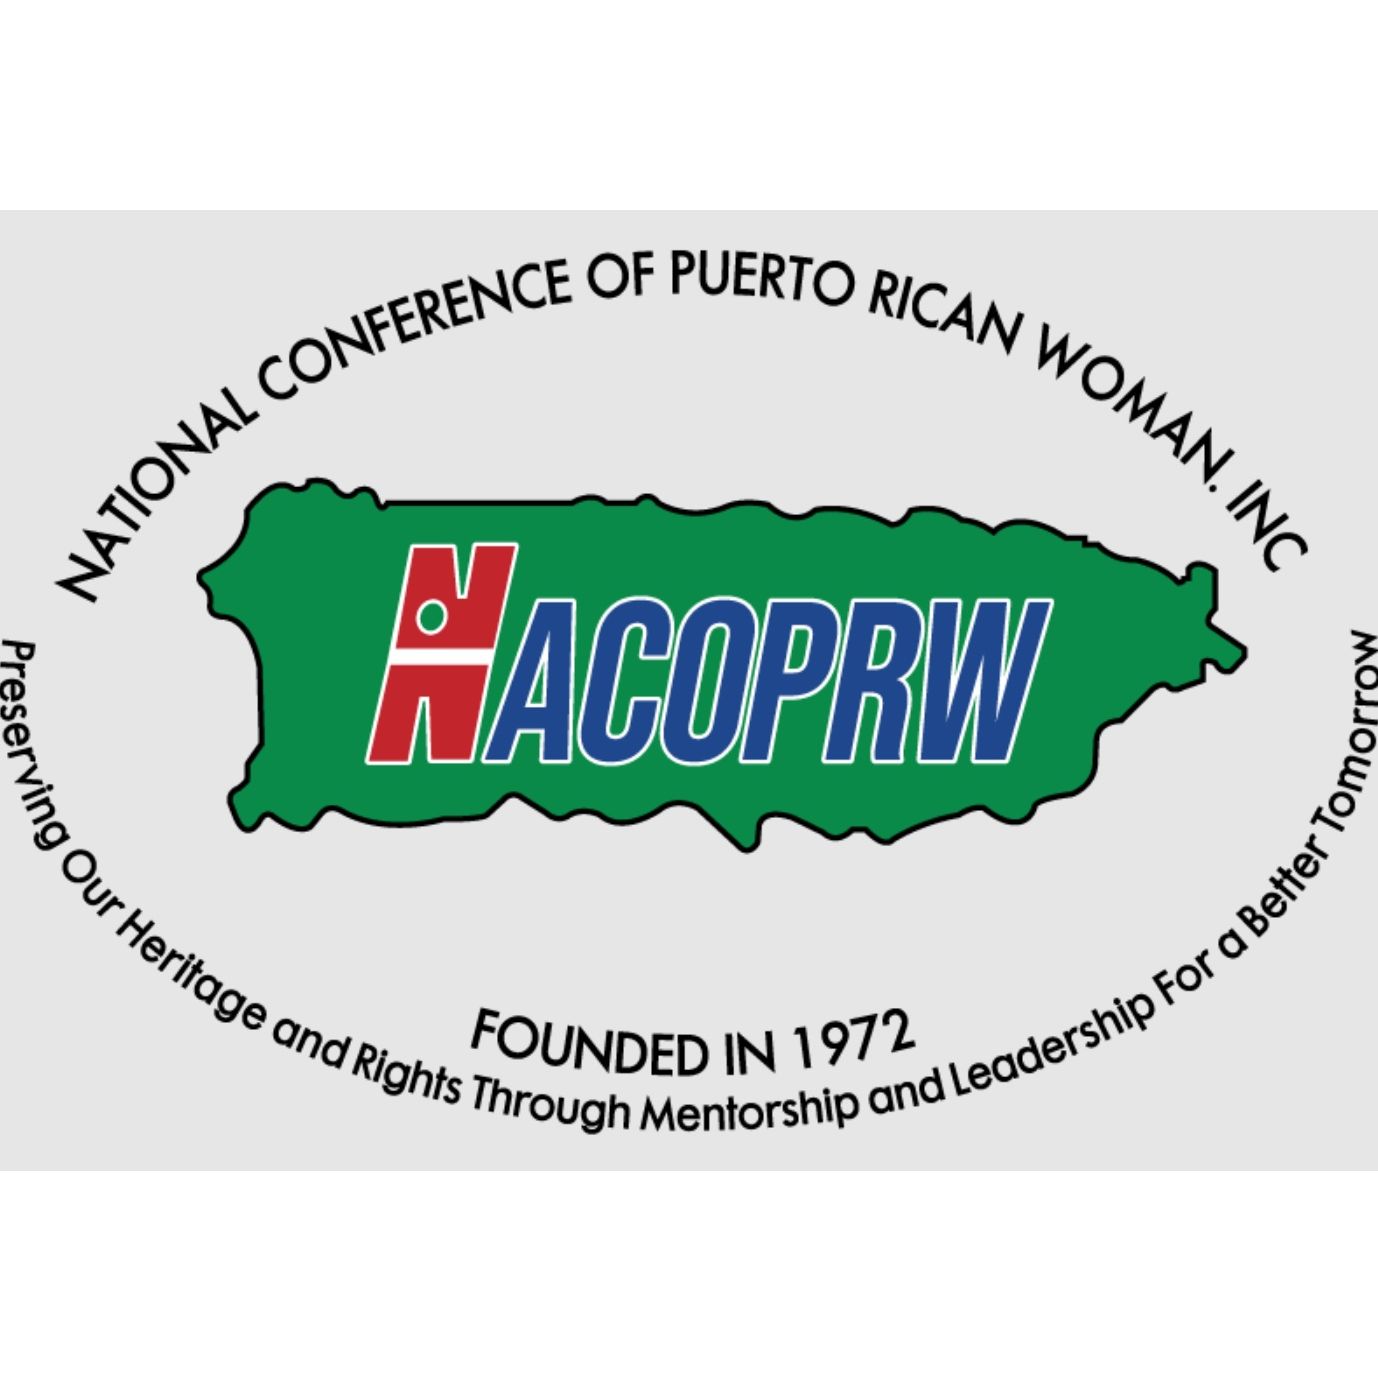 Female Organization in Chicago Illinois - Northern Illinois Chapter of National Conference of Puerto Rican Women